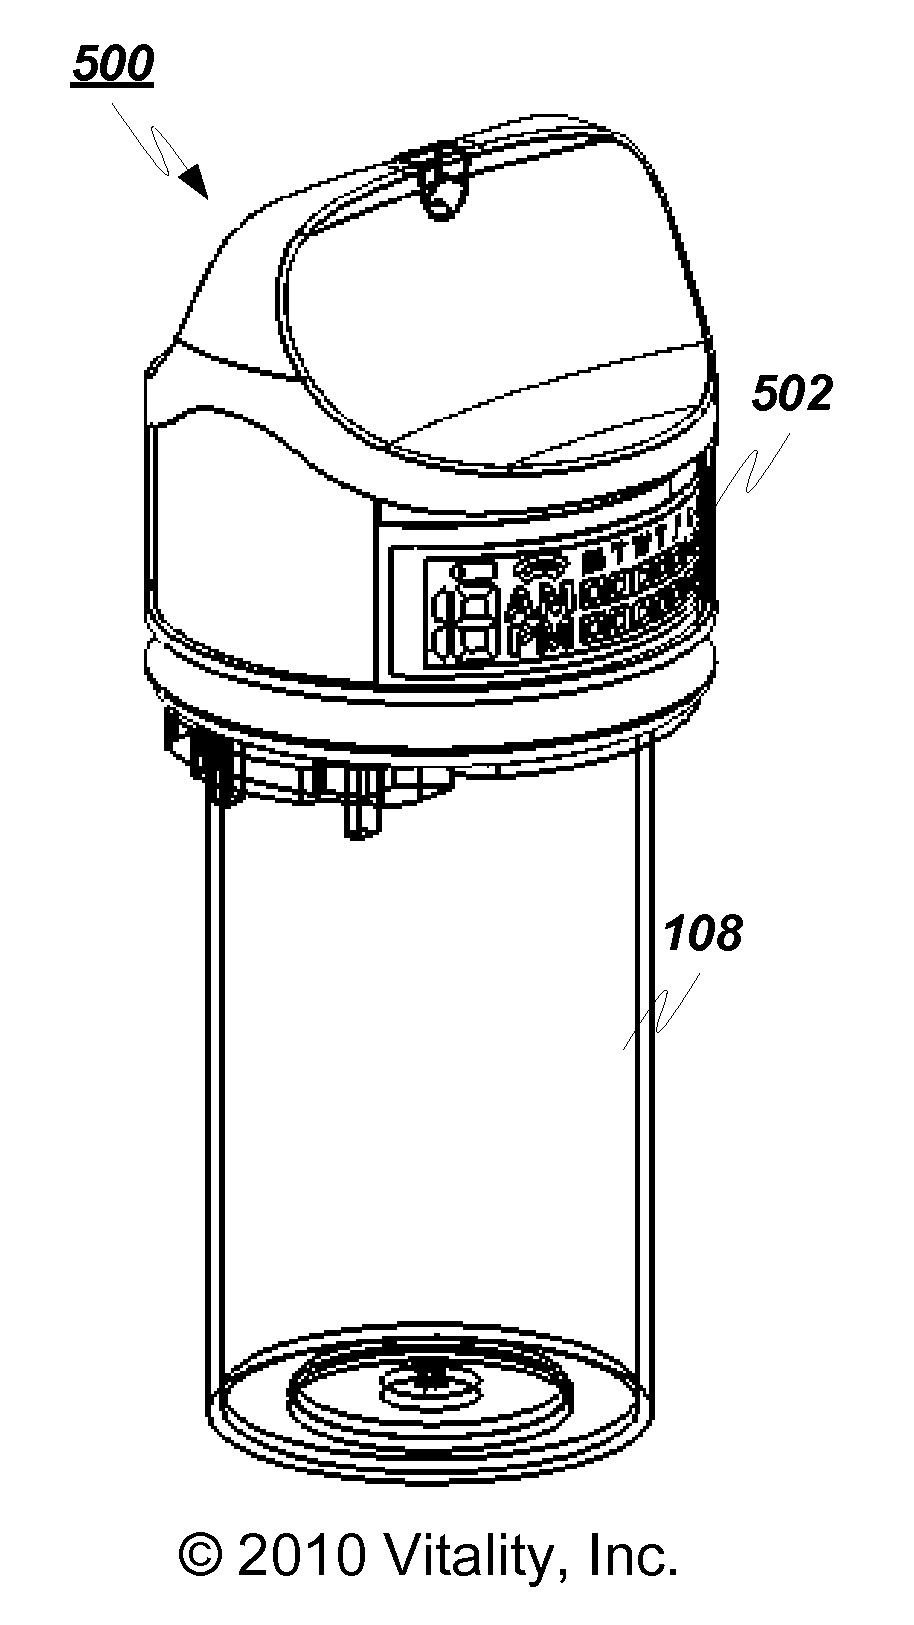 Medicine Bottle Cap With Electronic Embedded Curved Display